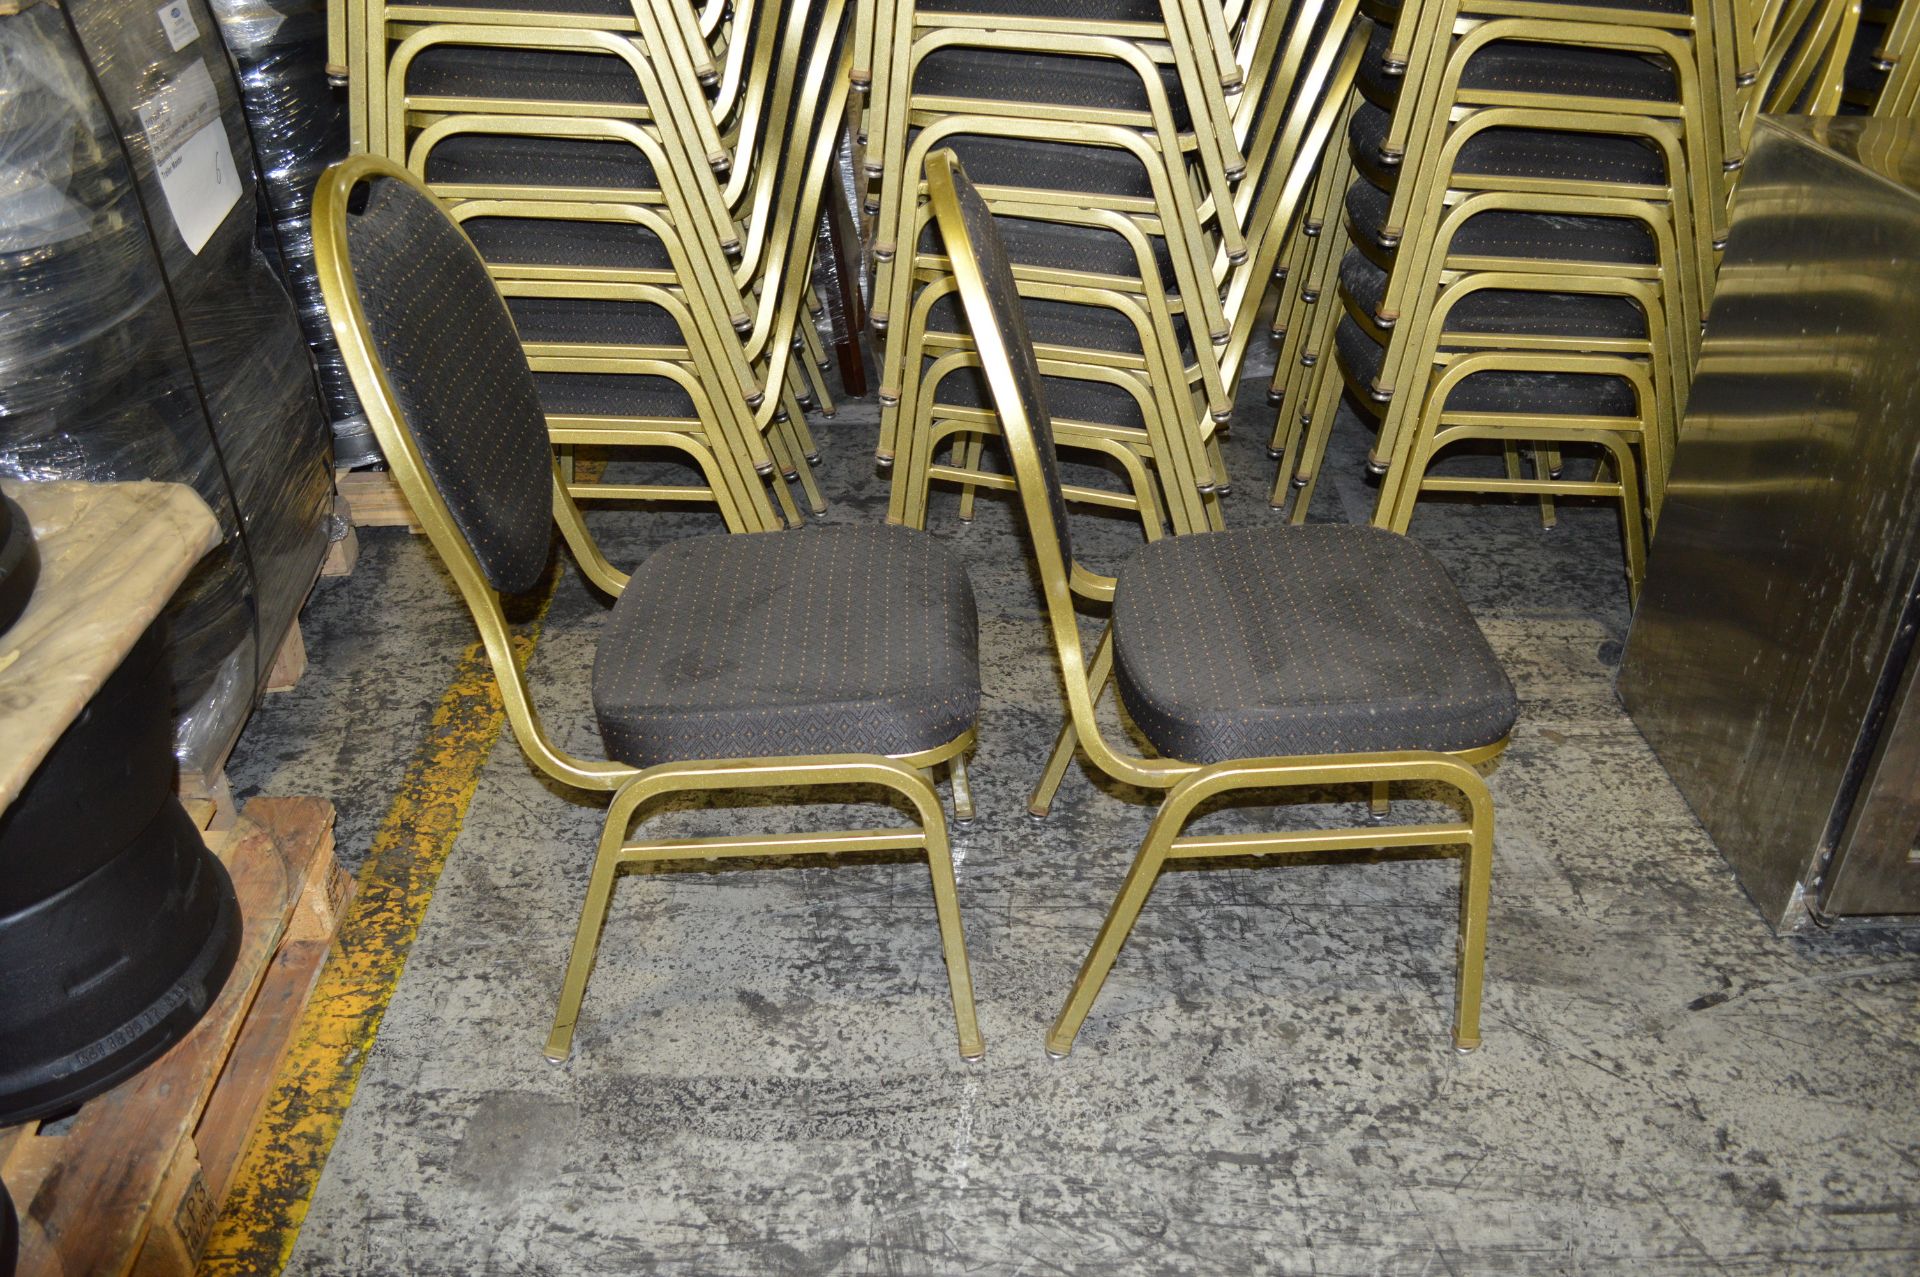 BANQUET METAL STACK CHAIRS-BLACK FABRIC-GOLD FRAME - Image 4 of 6